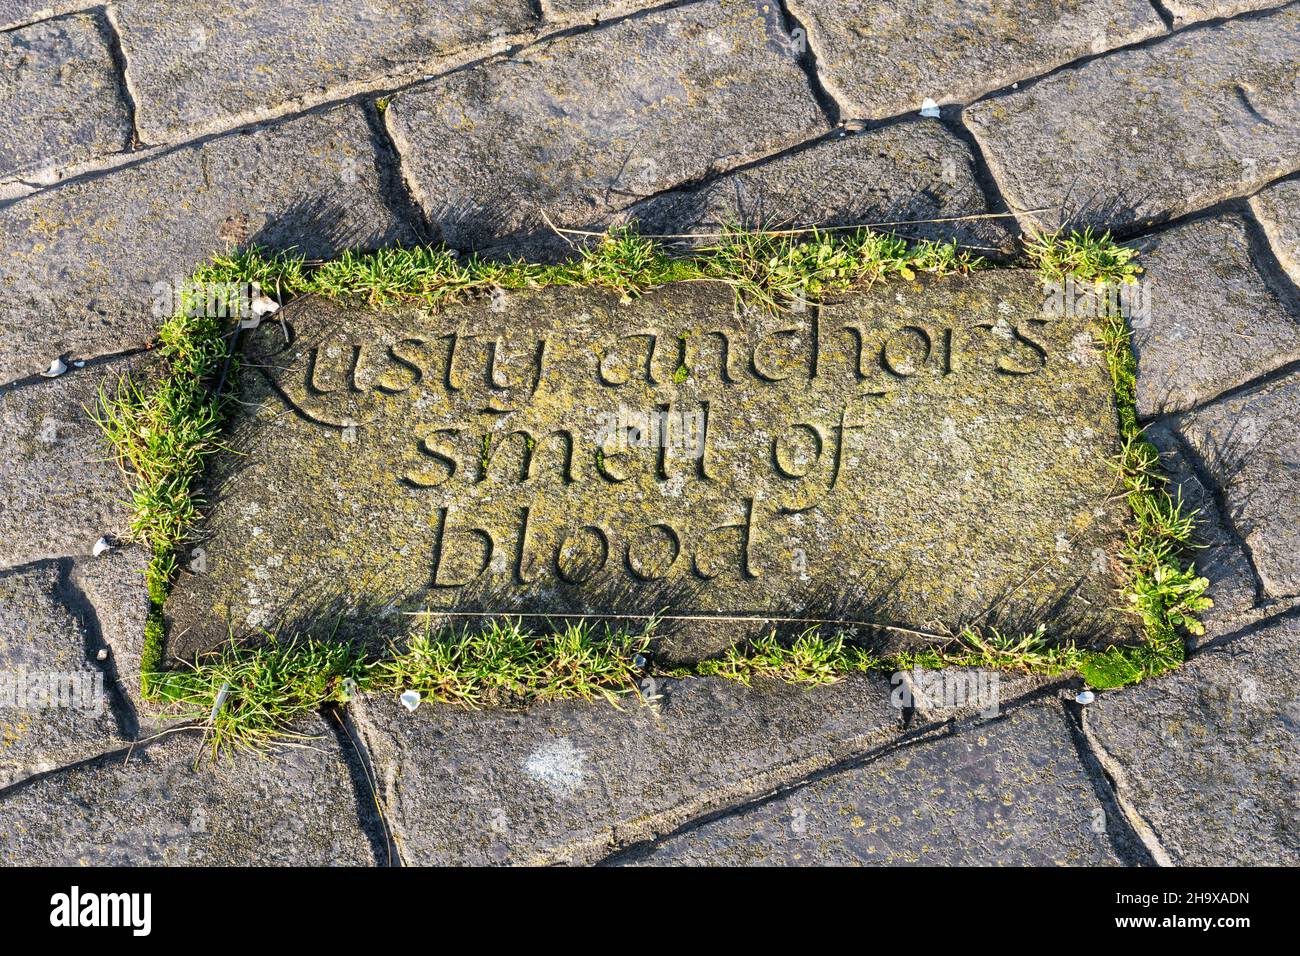 Carved stone slab in the harbour wall at Maryport with the words 'Rusty anchors smell of blood', Cumbria, England, UK Stock Photo